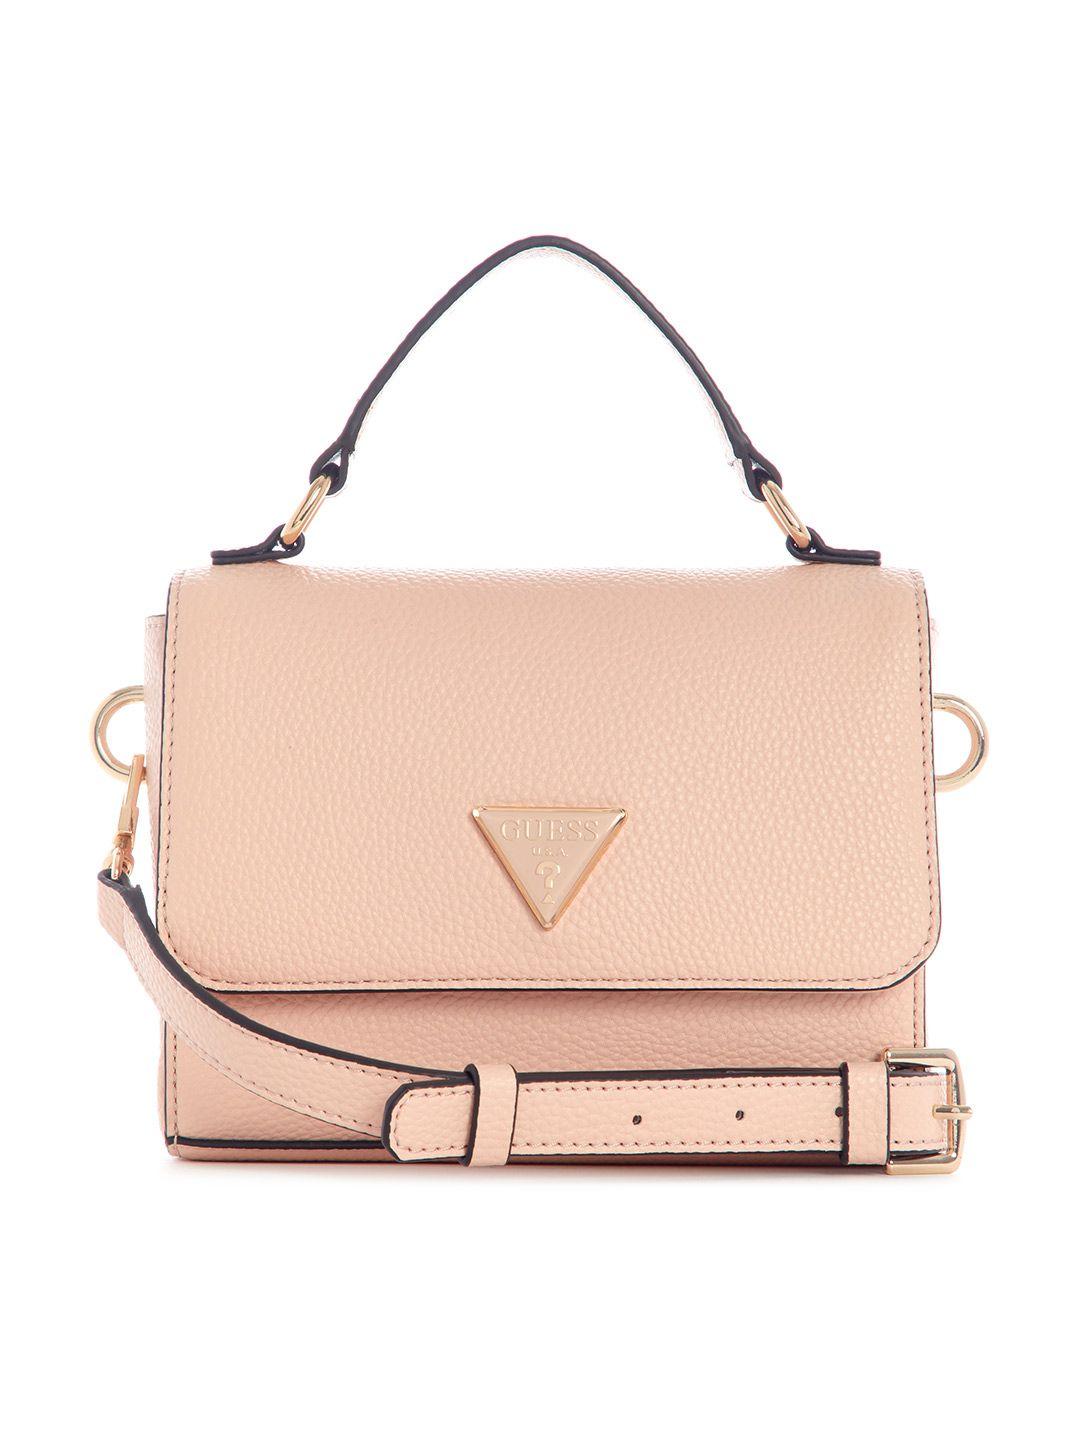 guess structured satchel with detachable sling strap